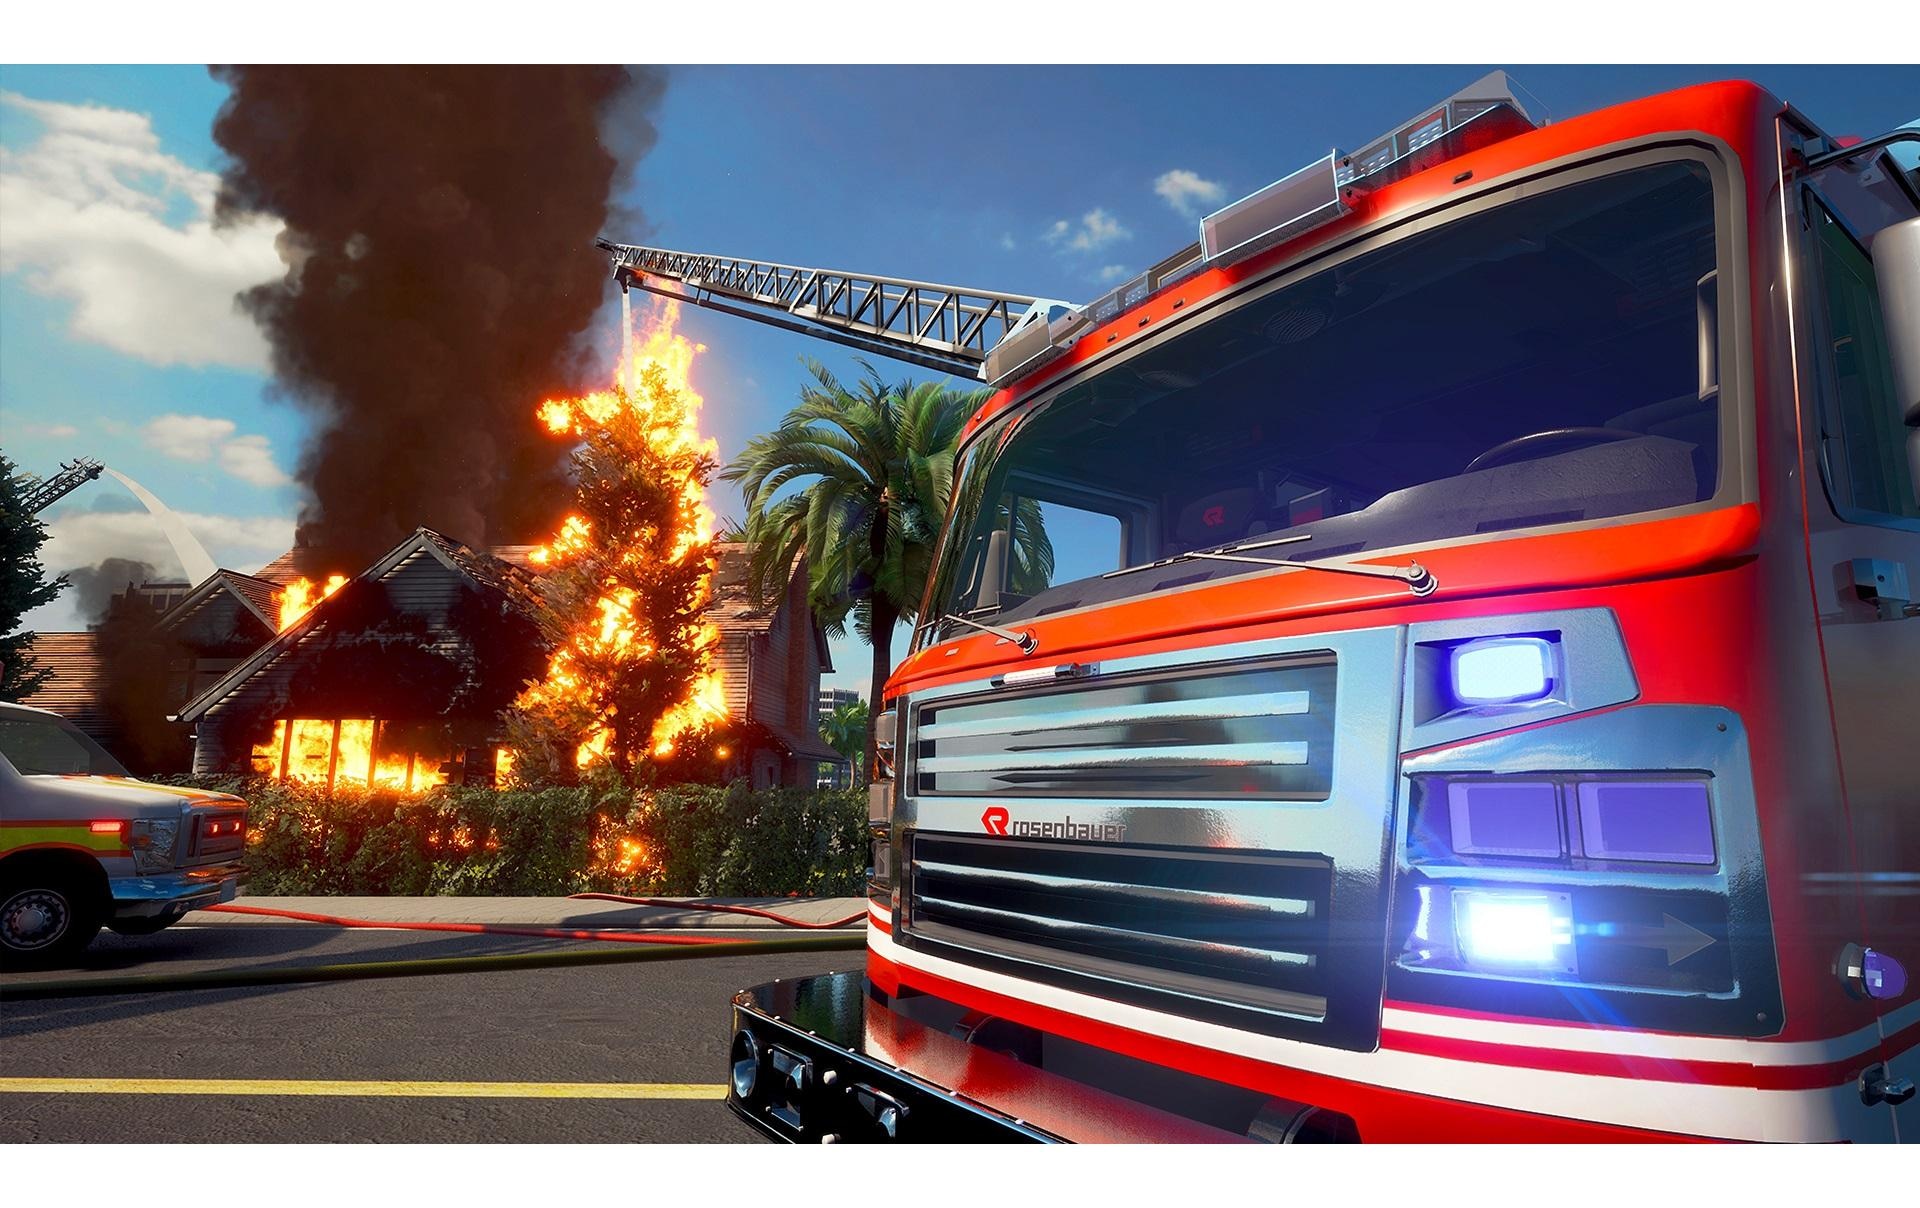 Astragon Spielesoftware »Firefighting Simulator: The Squad, PS4«, PlayStation 4